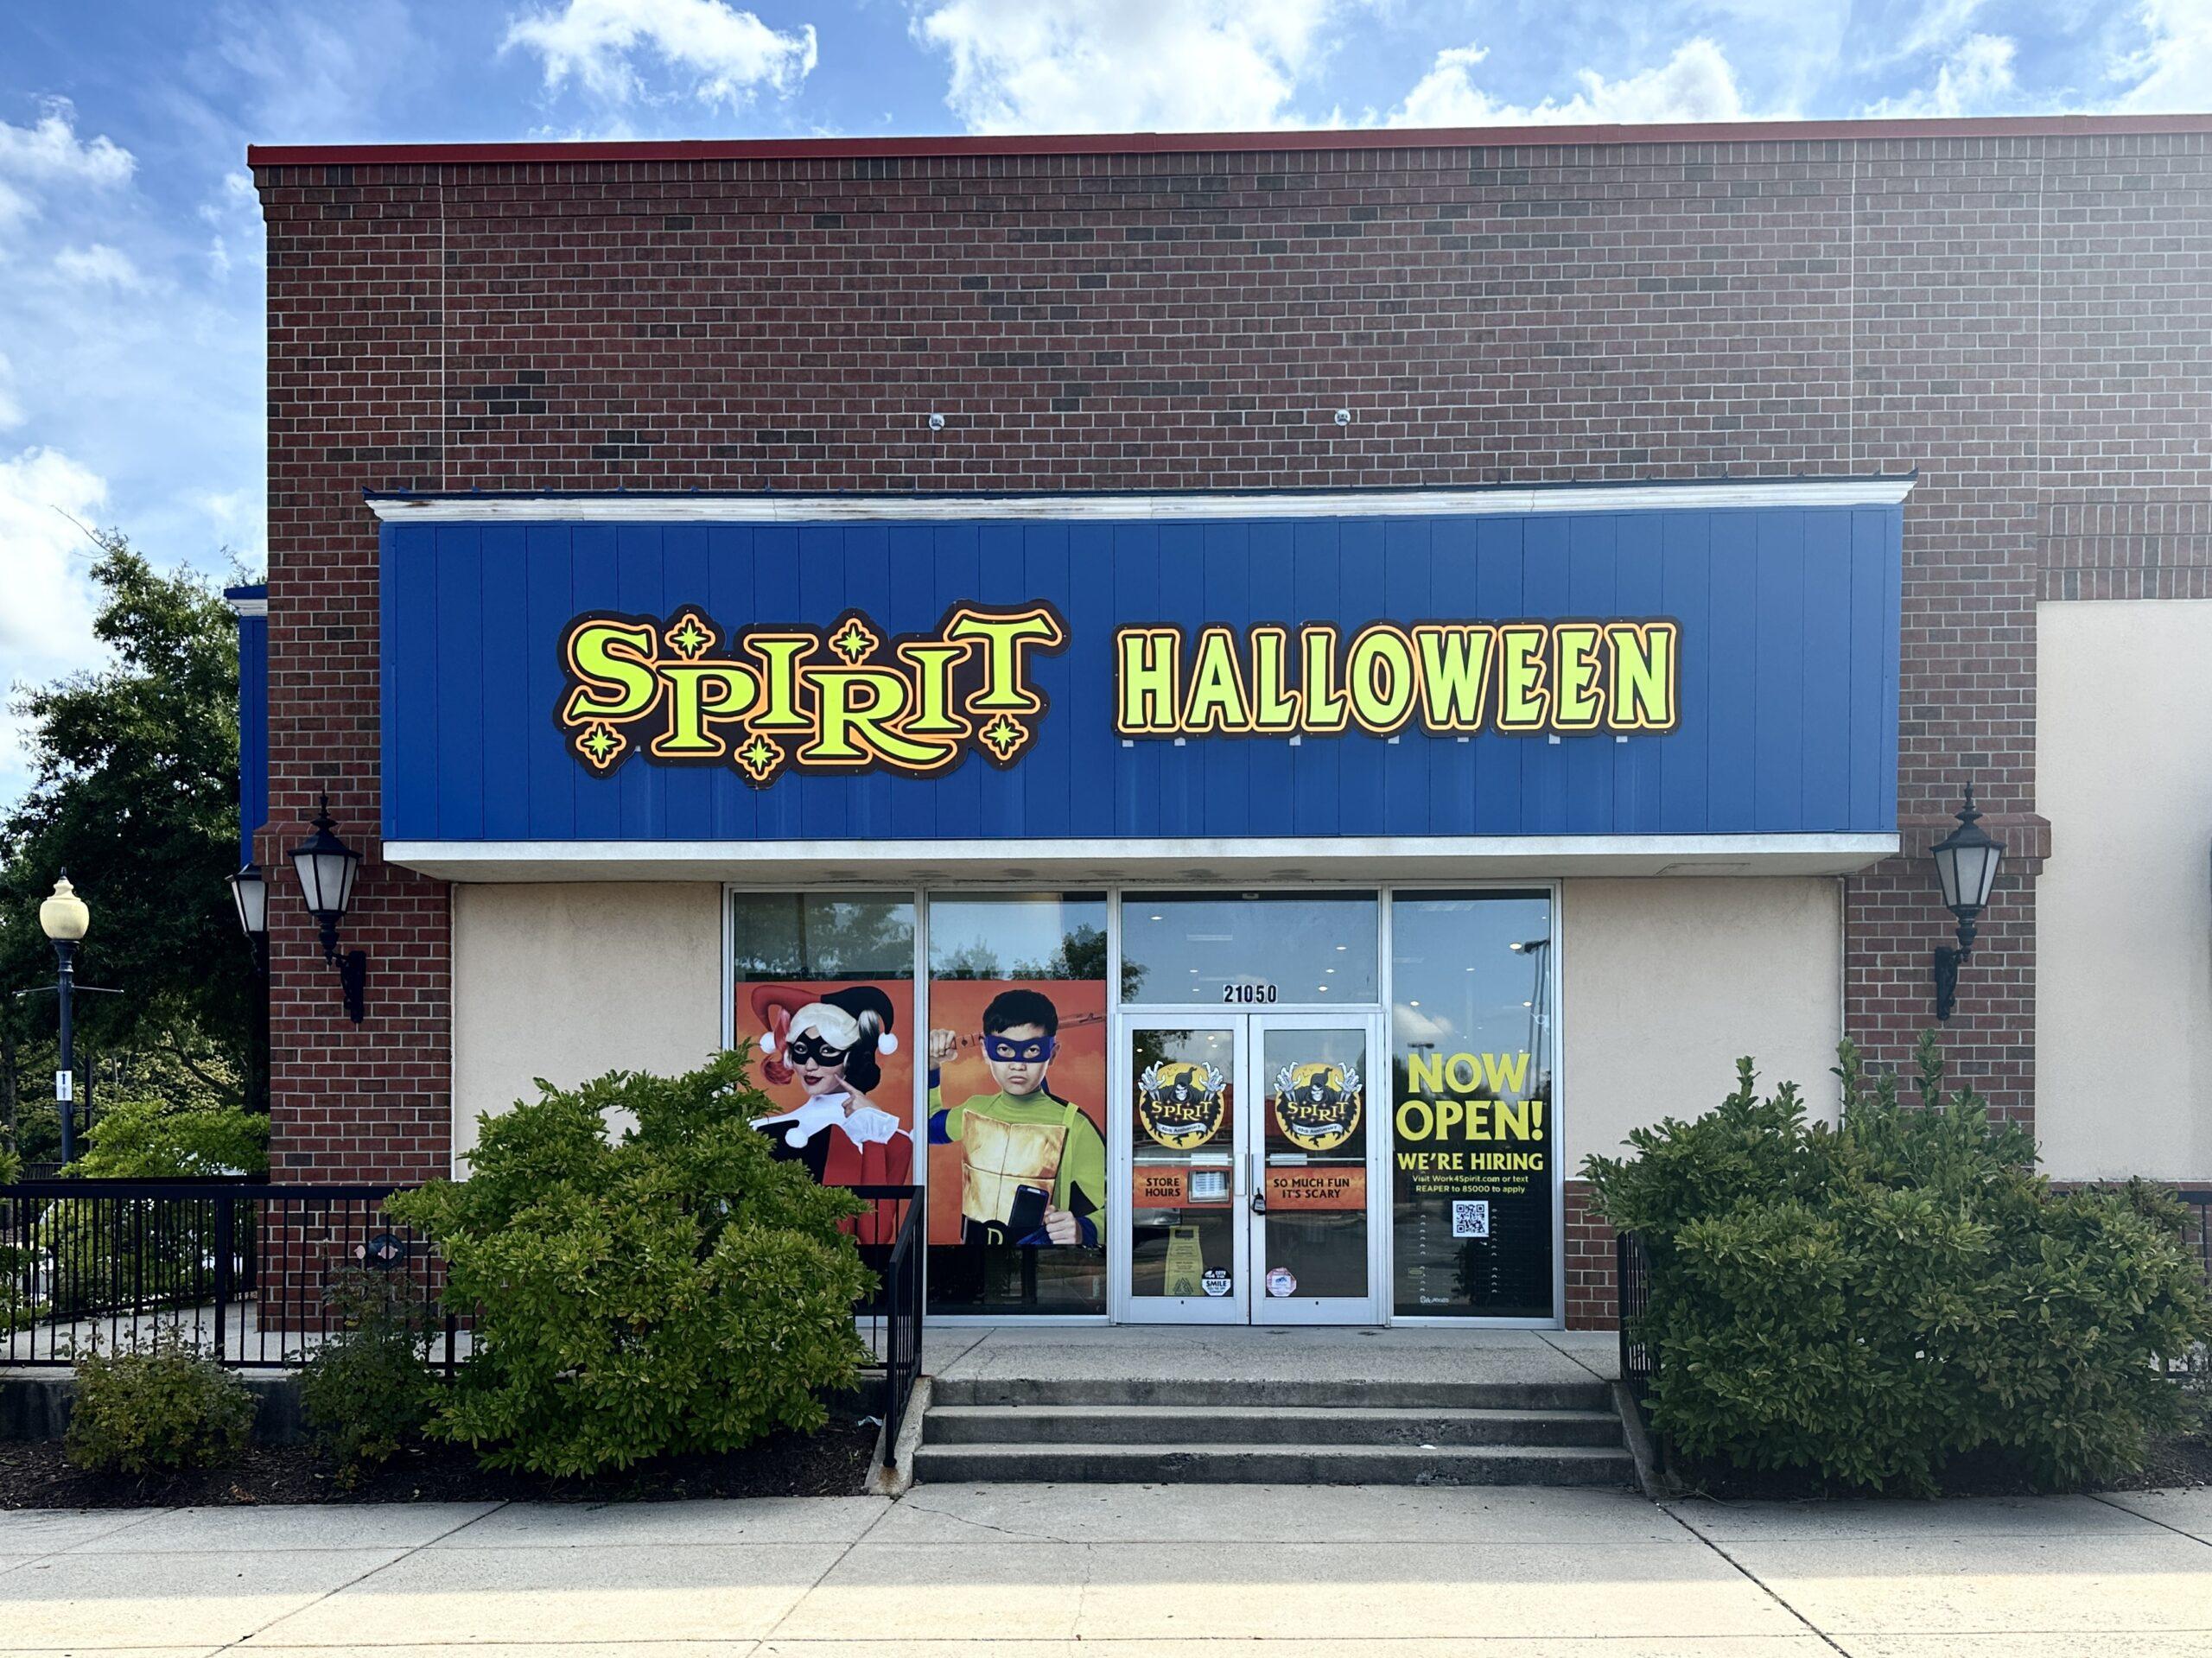 Just one Spirit Halloween store in Loudoun County this year